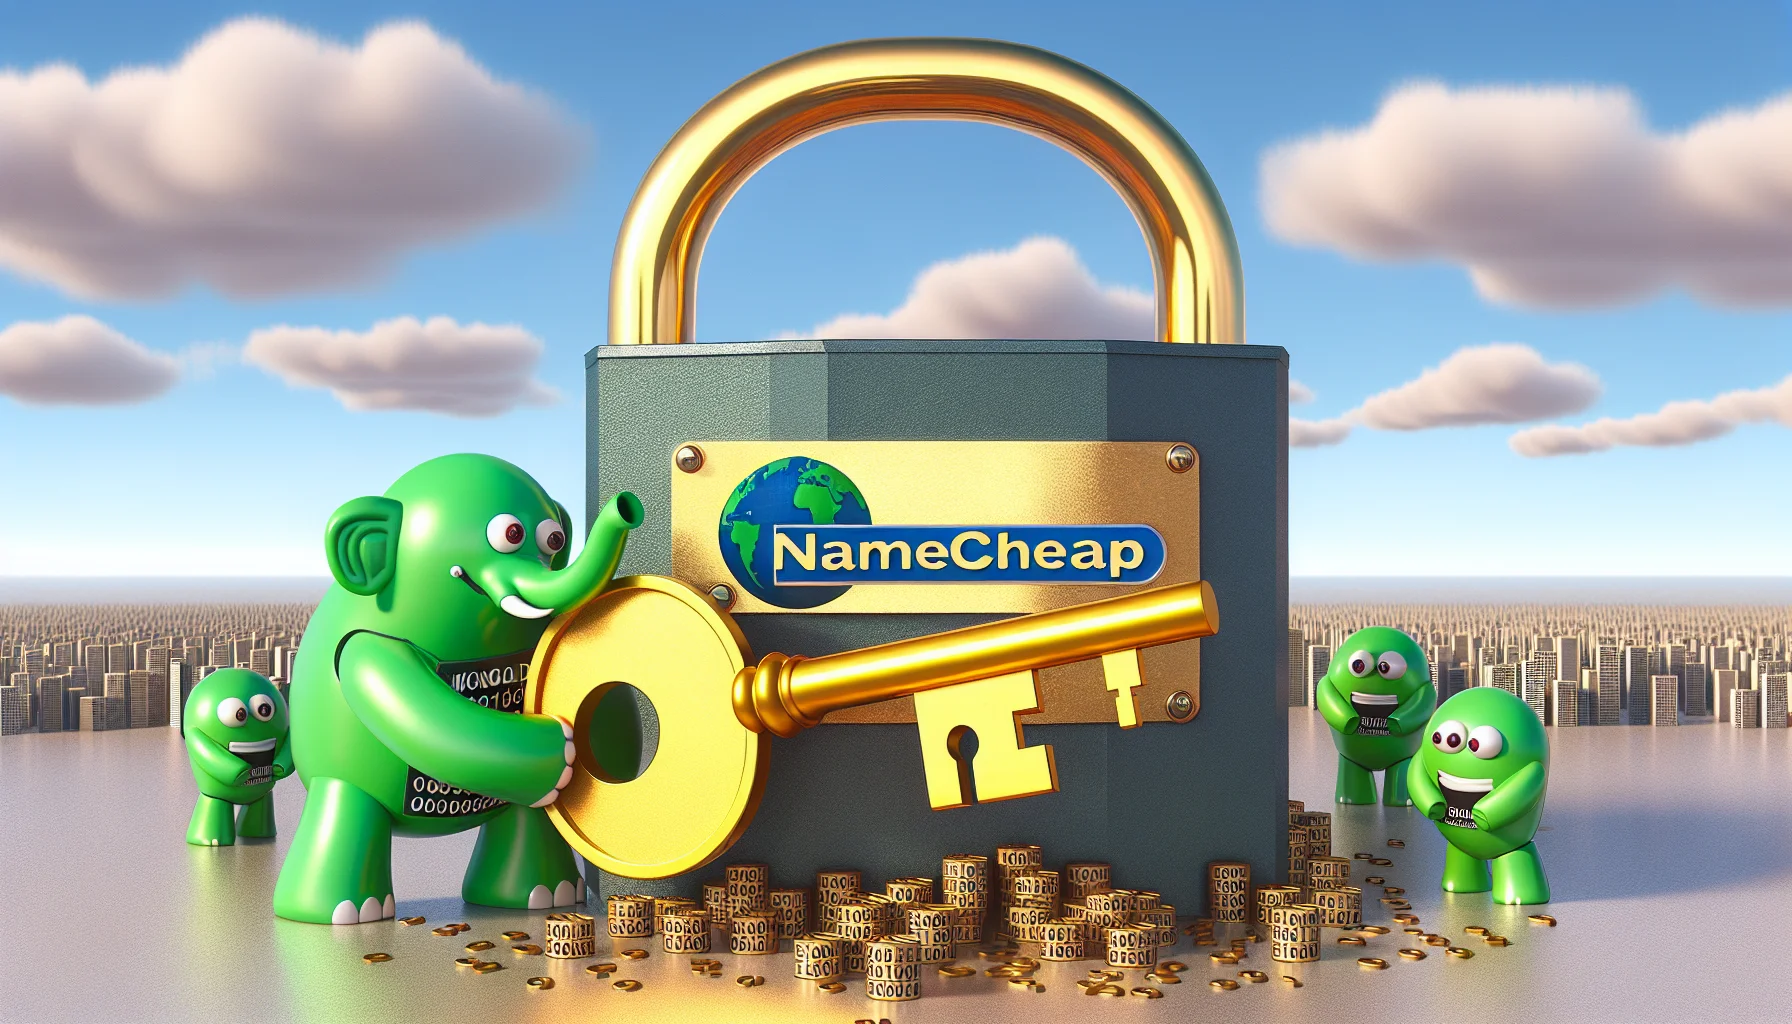 Generate a humorous scene where an anthropomorphized version of MongoDB, depicted as a green elephant with binary codes on its skin, is trying to push a gigantic, gold key into the keyhole of a massive domain lock, symbolizing Namecheap. The lock is embossed with an image of globe to represent web hosting. Additionally, include an audience of smiling binary entities, indicating applications supporting this amusing effort, while the skyline in the background portrays a vast digital landscape.